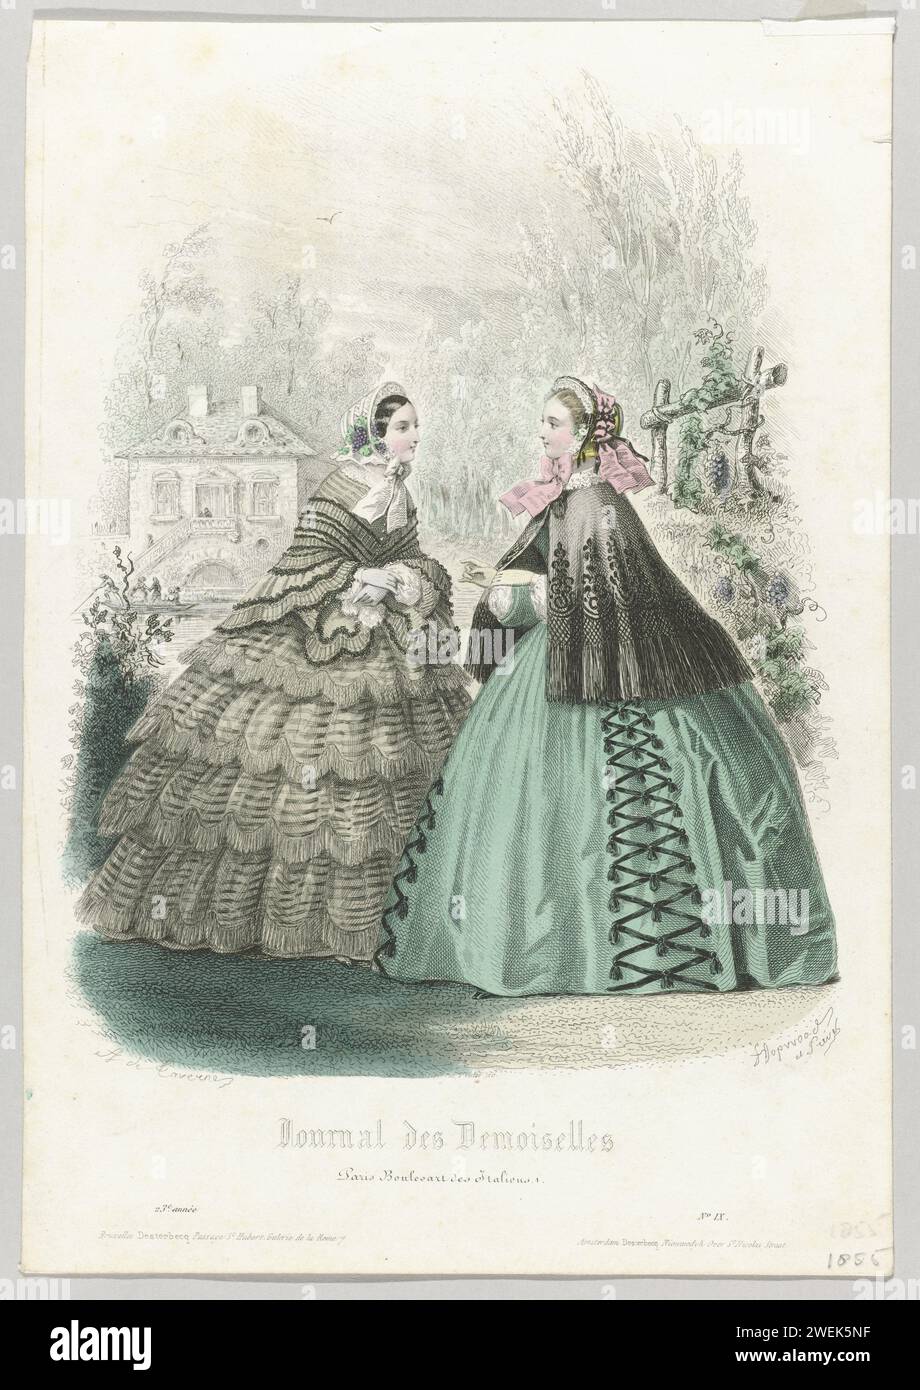 Journal des Demoiselles, 1855, No. 9, 23rd year, 1855  Two women in a landscape; In the background an estate and some people in a boat. Left: Striped dress with wide skirt, wrinkled strips of fabric, scalloped hem and trimmed with fringes. Decorated a hat on the head with grape bunches. Handkerchief in hand. Right: short black cape with curly motif and trimmed with fringes. Green dress with wide skirt decorated with tire and tassels. Poffing submerged. Decorated a hat on the head with pink ribbon. Print from the fashion magazine Journal des Demoiselles (1833 -1922).  paper steel engraving fash Stock Photo